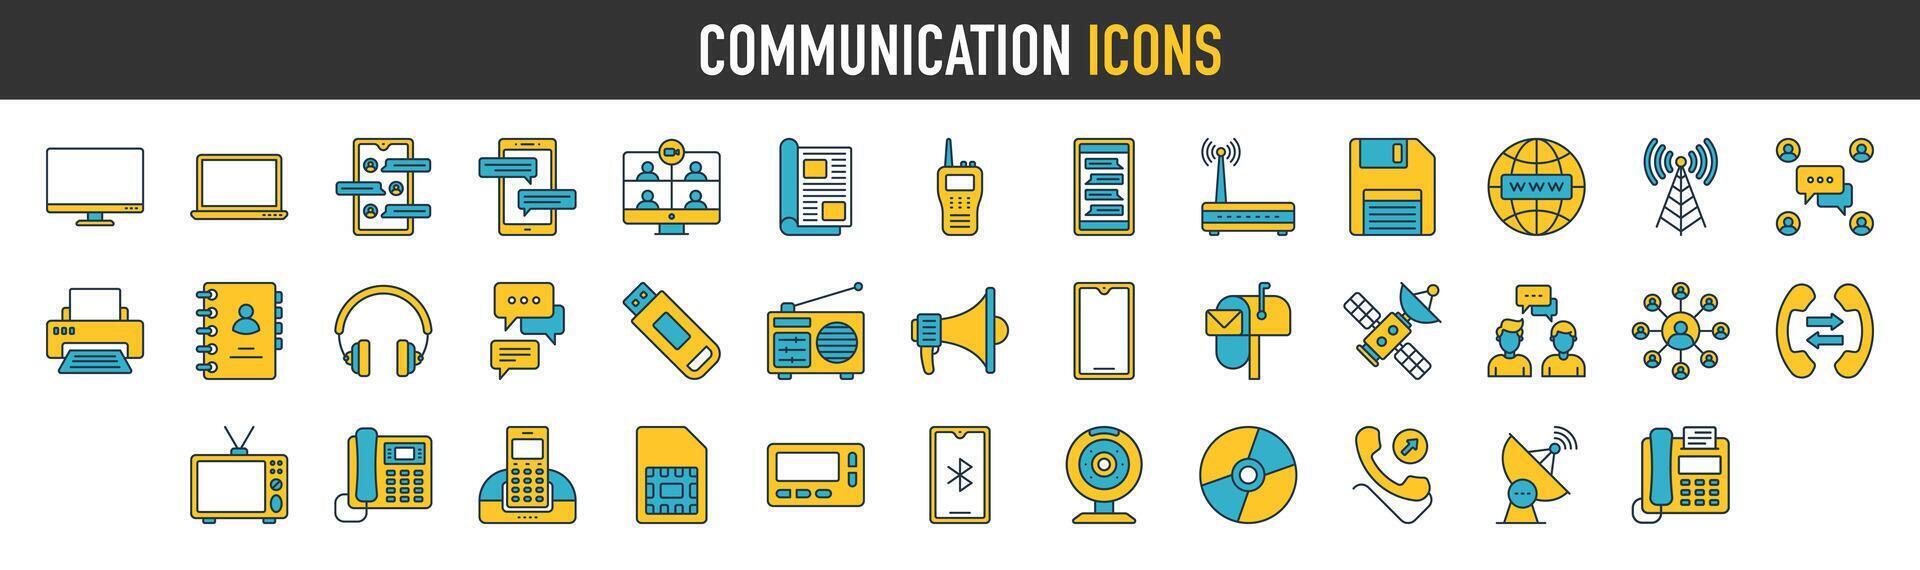 Communication Icons Pack. Simple vector icon collection illustration.